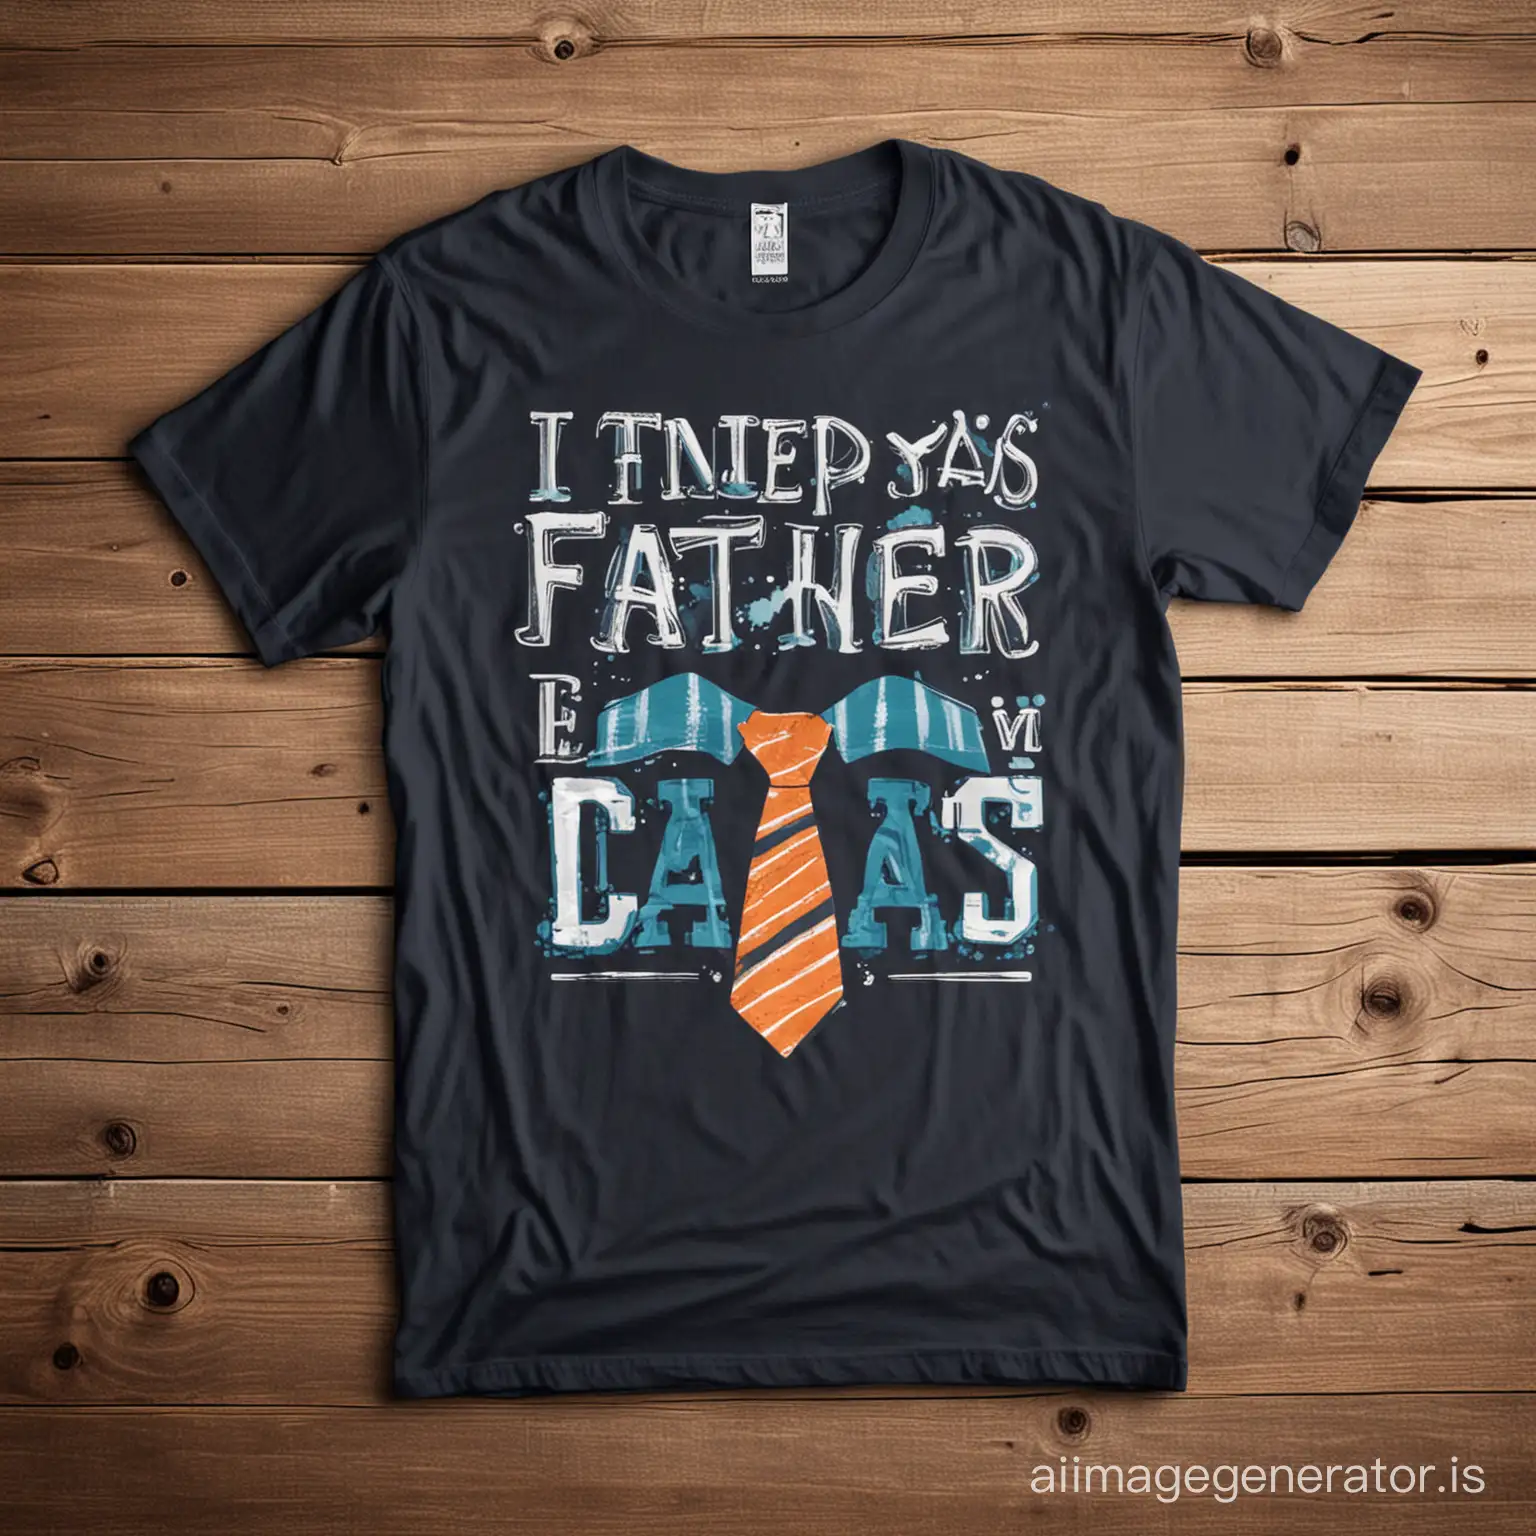 I WANT A DESIGN FOR FATHER'S DAY   TO MAKE IN A SHIRT

